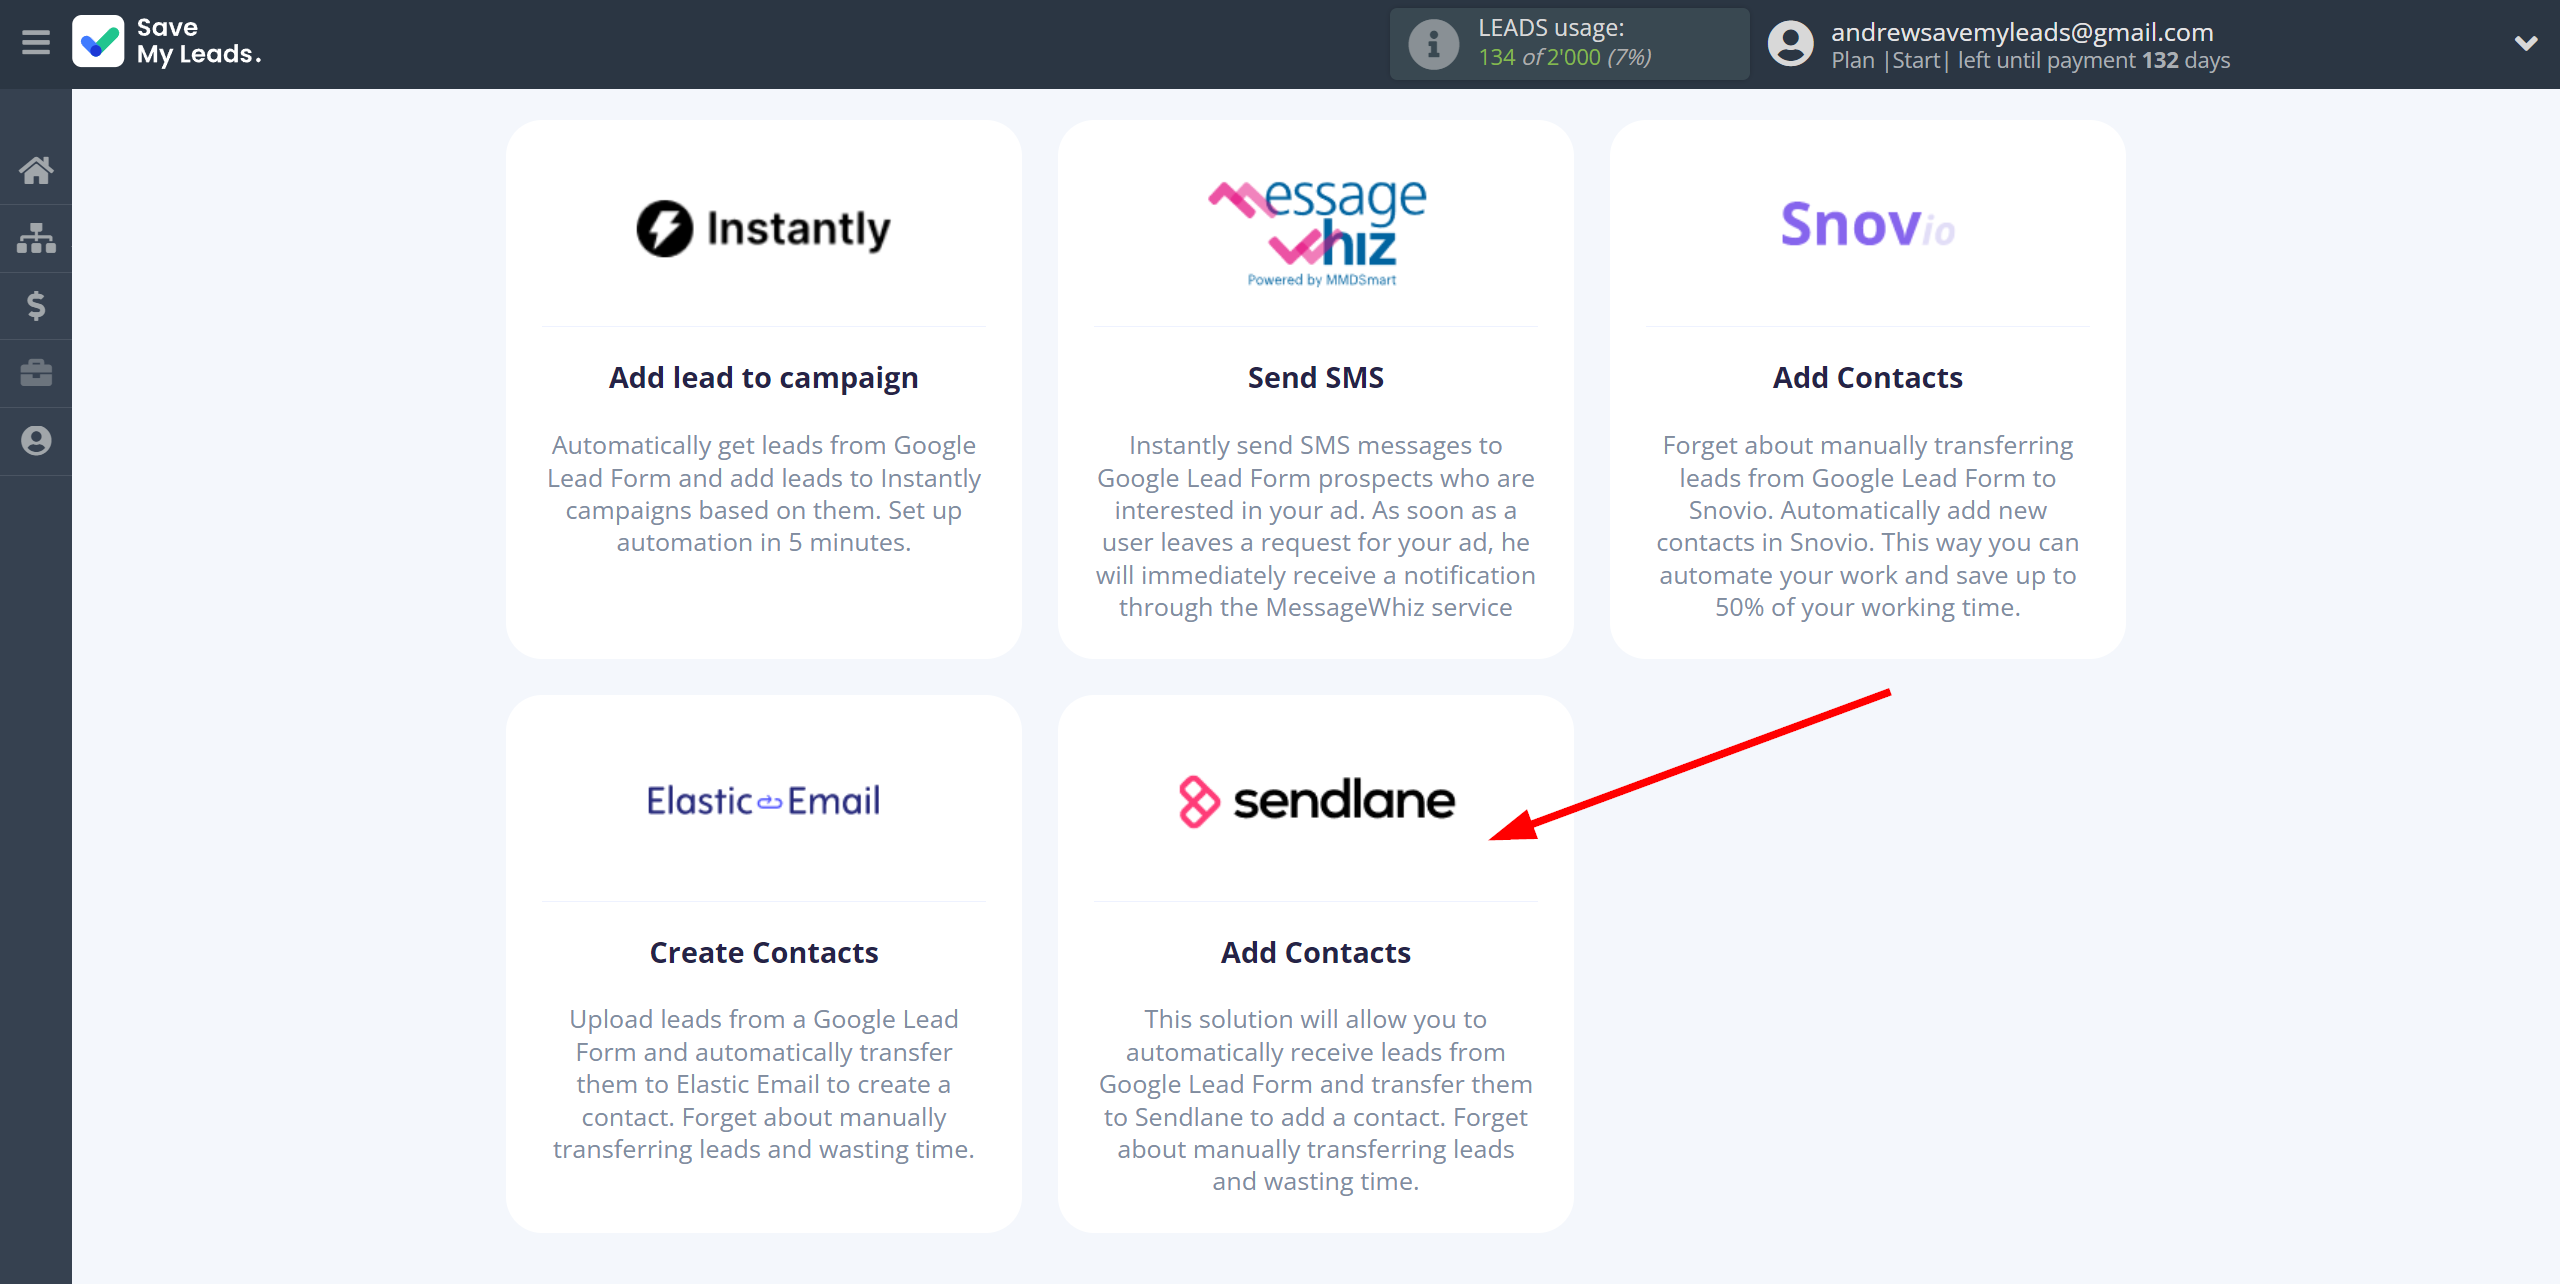 How to Connect Google Lead Form with Sendlane Add Contacts | Data Destination system selection